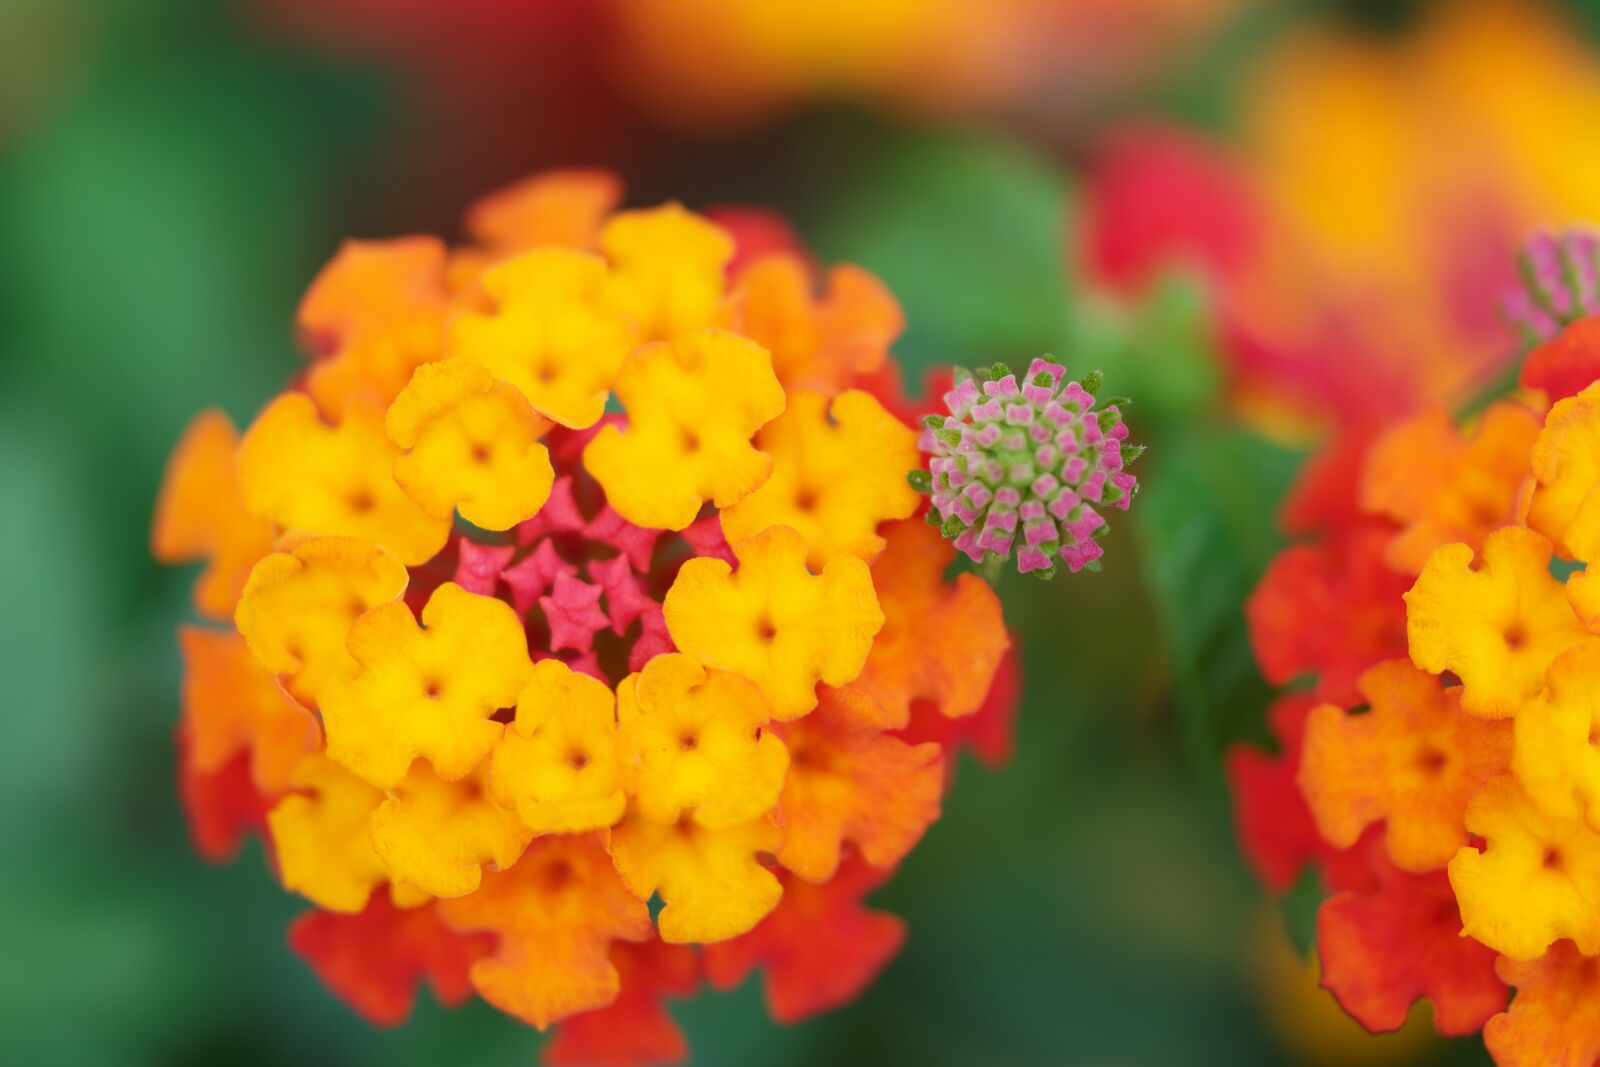 NX 60mm F2.8 Macro sample photo. Flower, colorful, blossom photography